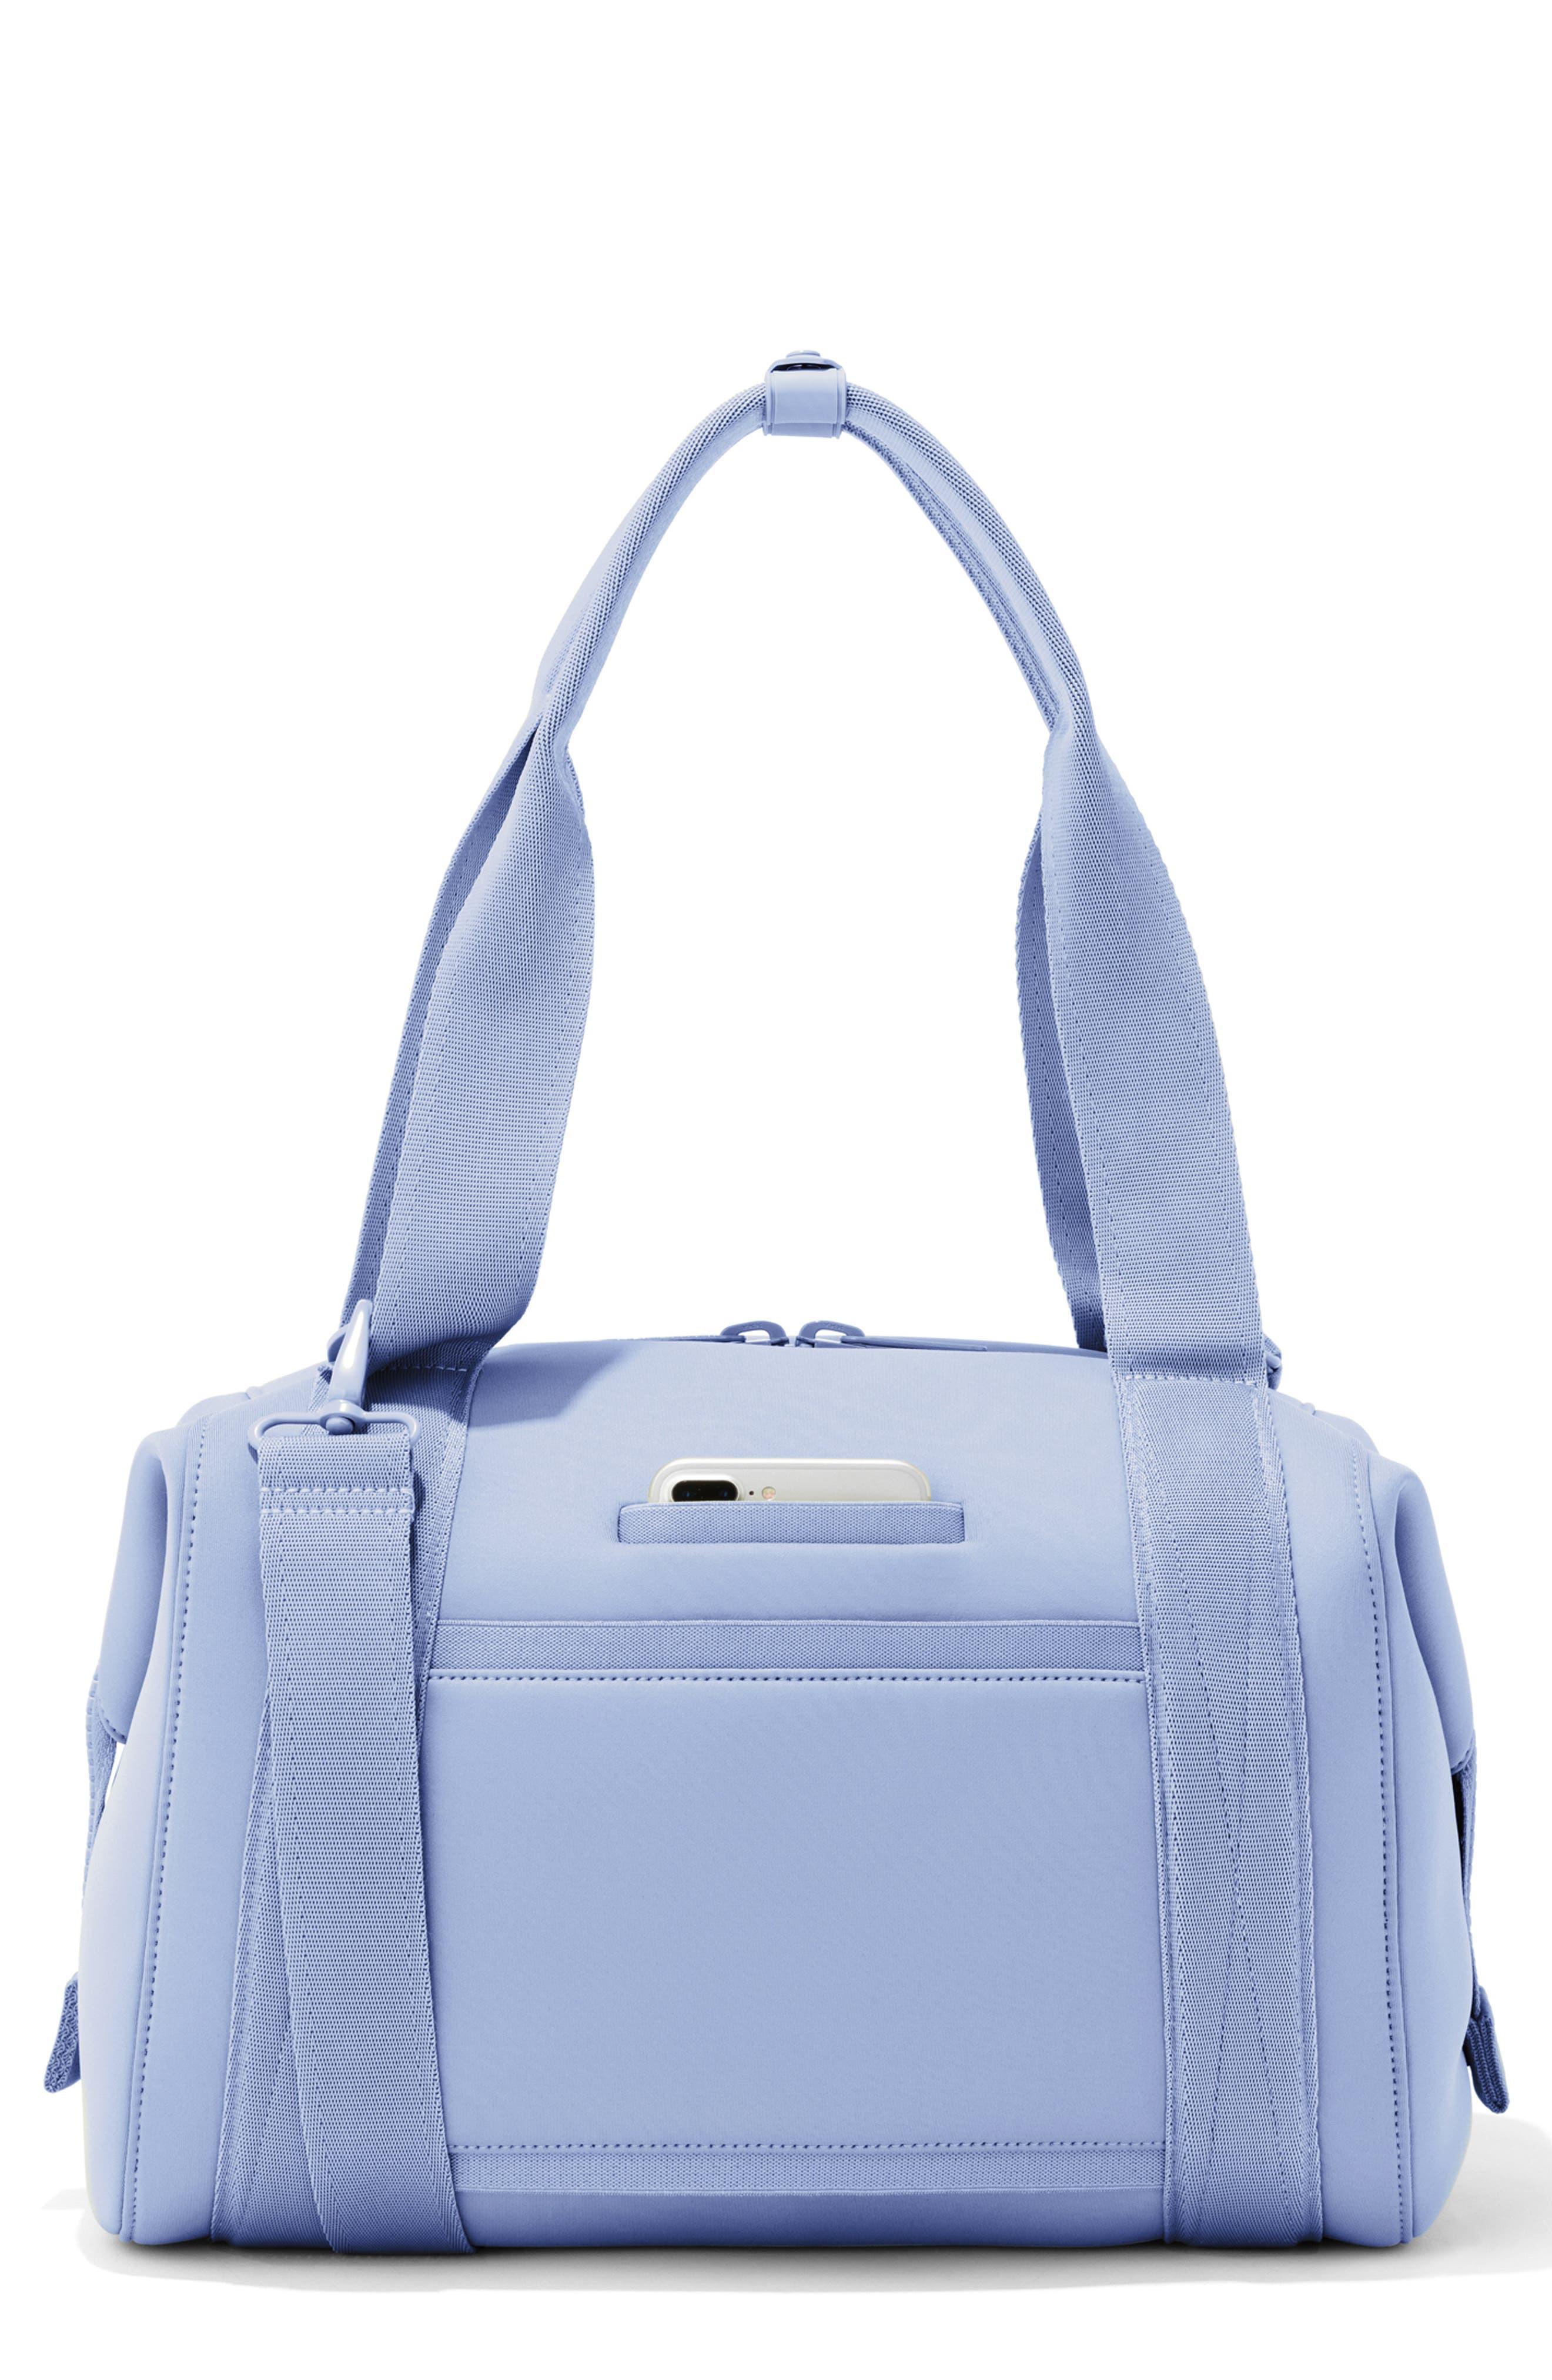 Landon Carryall - Stylish All-Around Bag by Dagne Dover